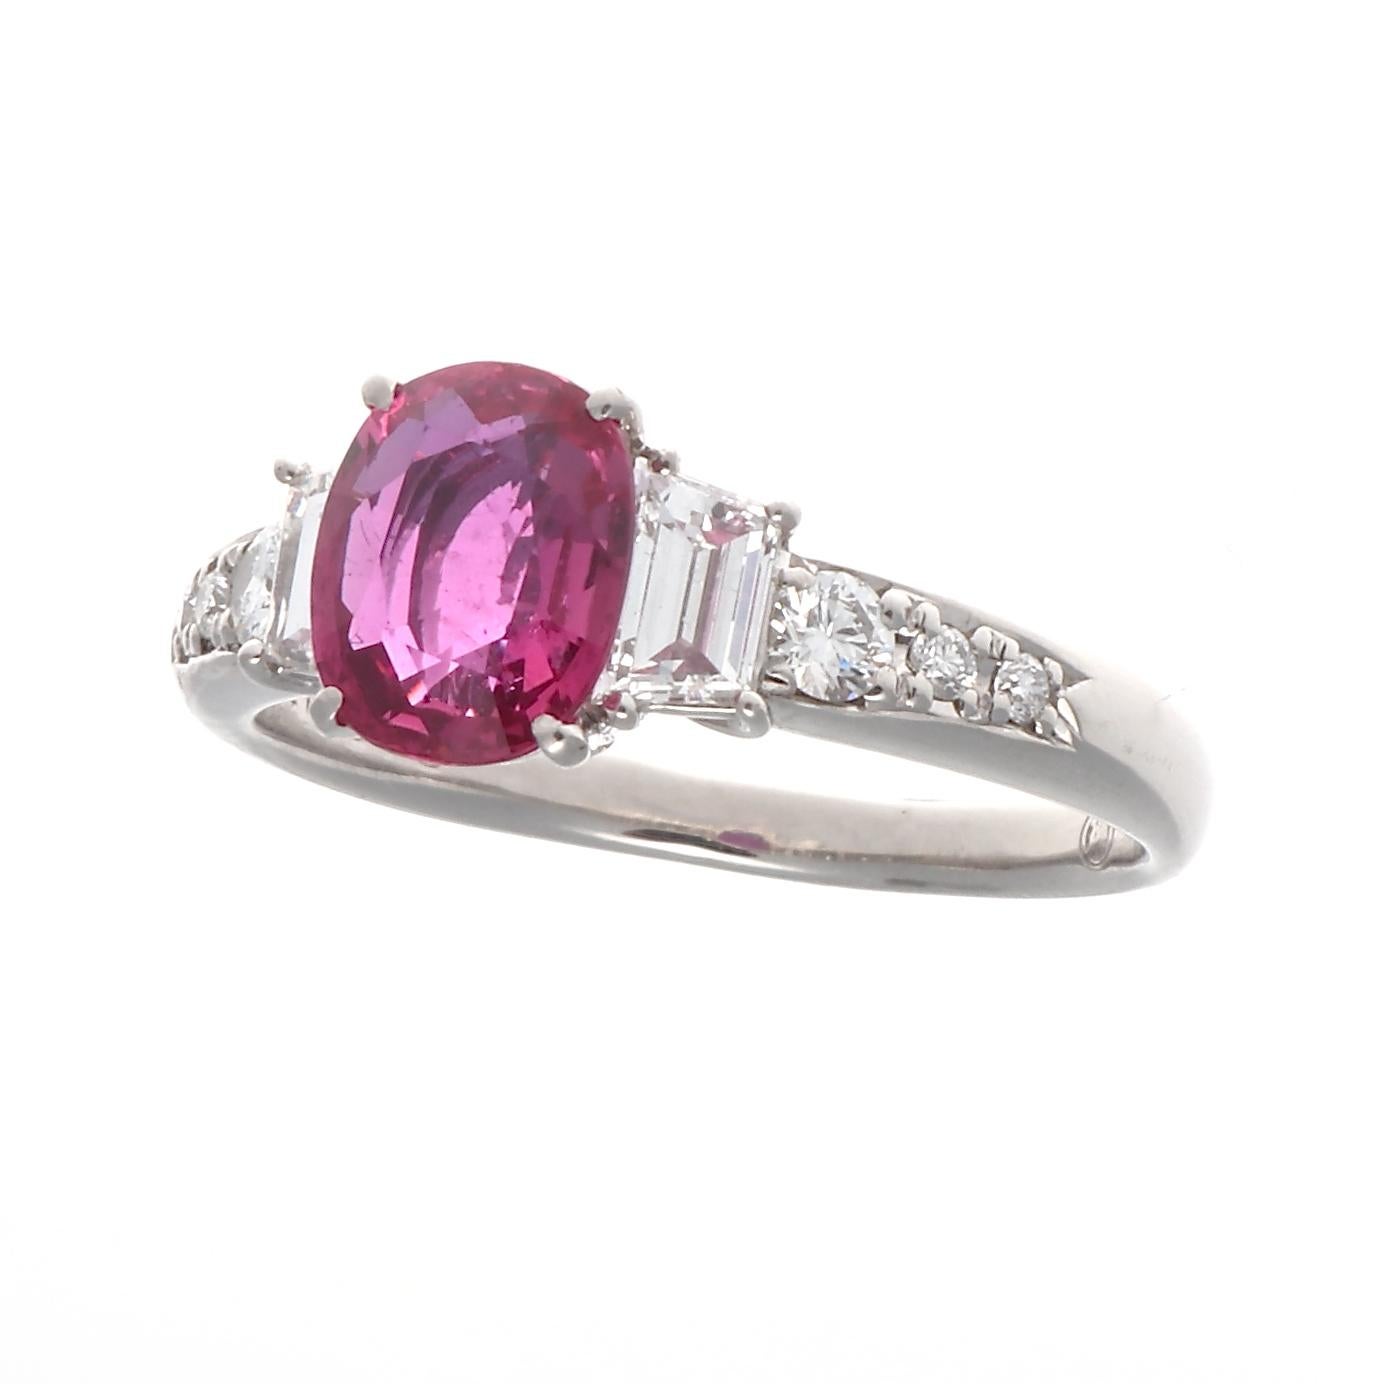 A sensation of color sparkles from this modern creation. Featuring a Guild Laboratory certified 1.64 carat no heat Ceylon ruby accented by 0.62 carats of cascading trapezoidal and round cut colorless diamonds. Crafted in platinum. Ring size 6 and